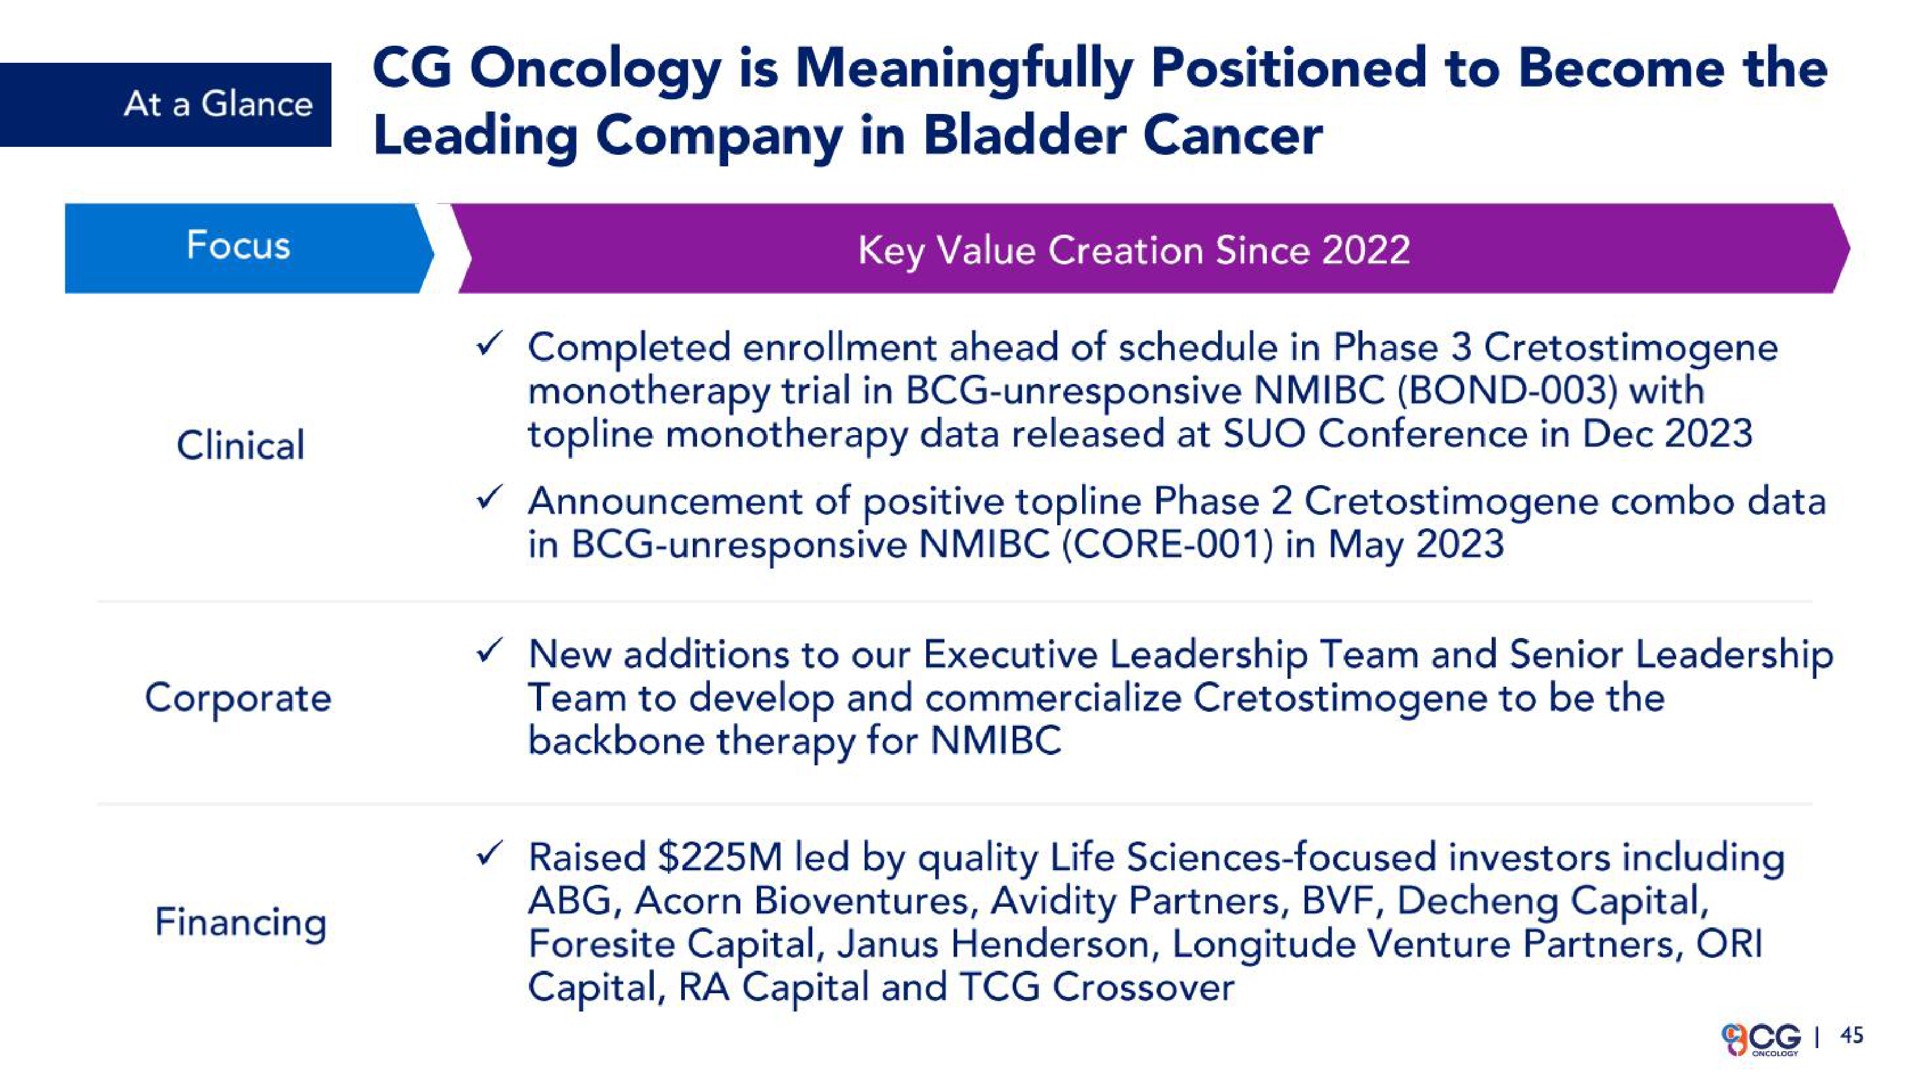 oncology is meaningfully positioned to become the leading company in bladder cancer | CG Oncology